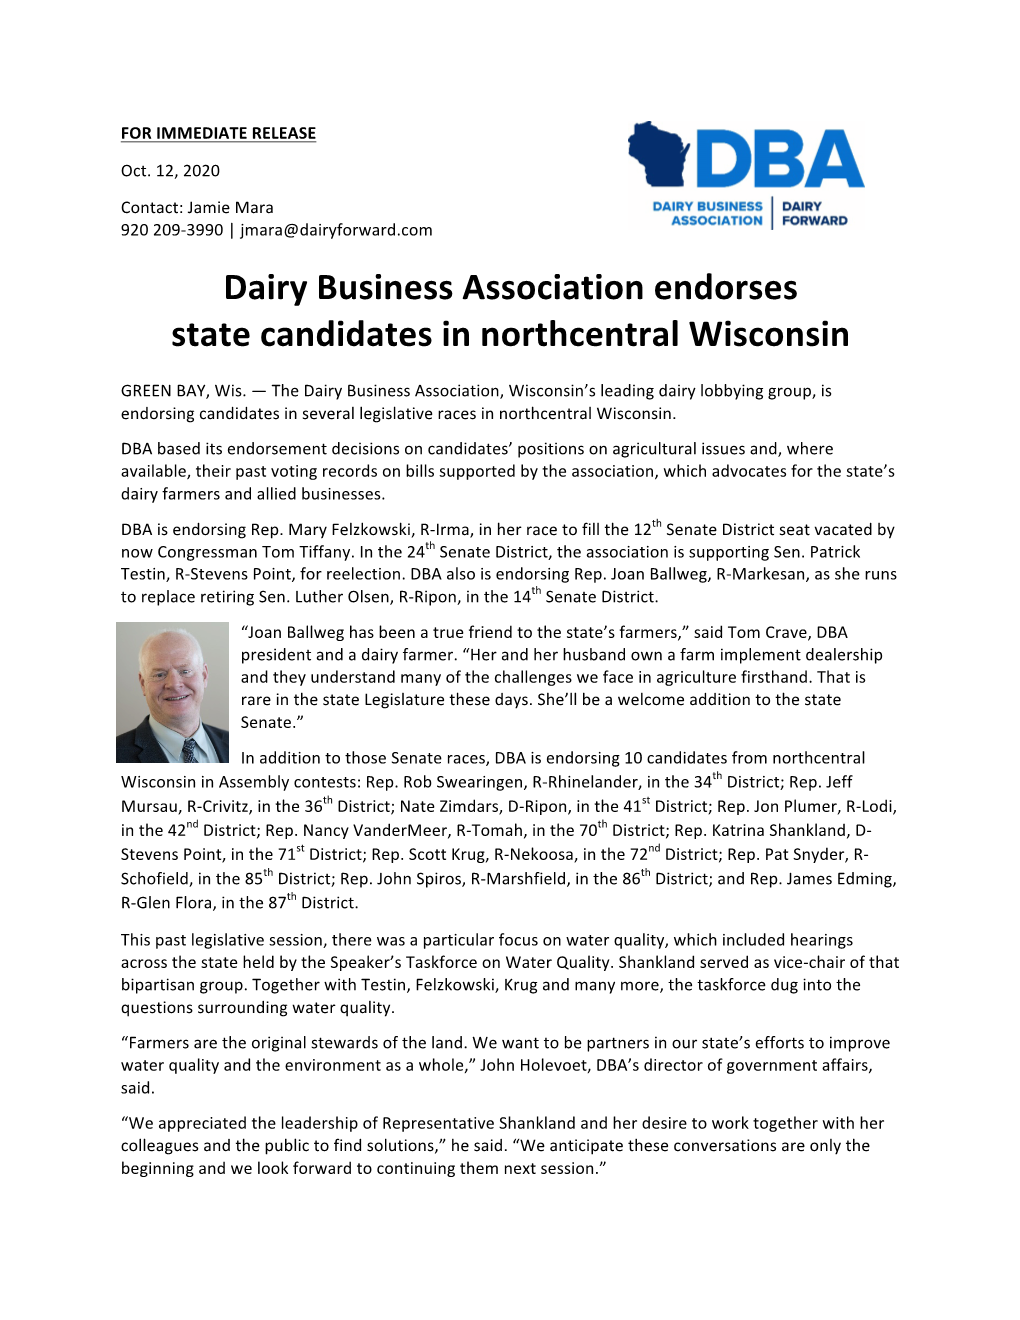 Dairy Business Association Endorses State Candidates in Northcentral Wisconsin